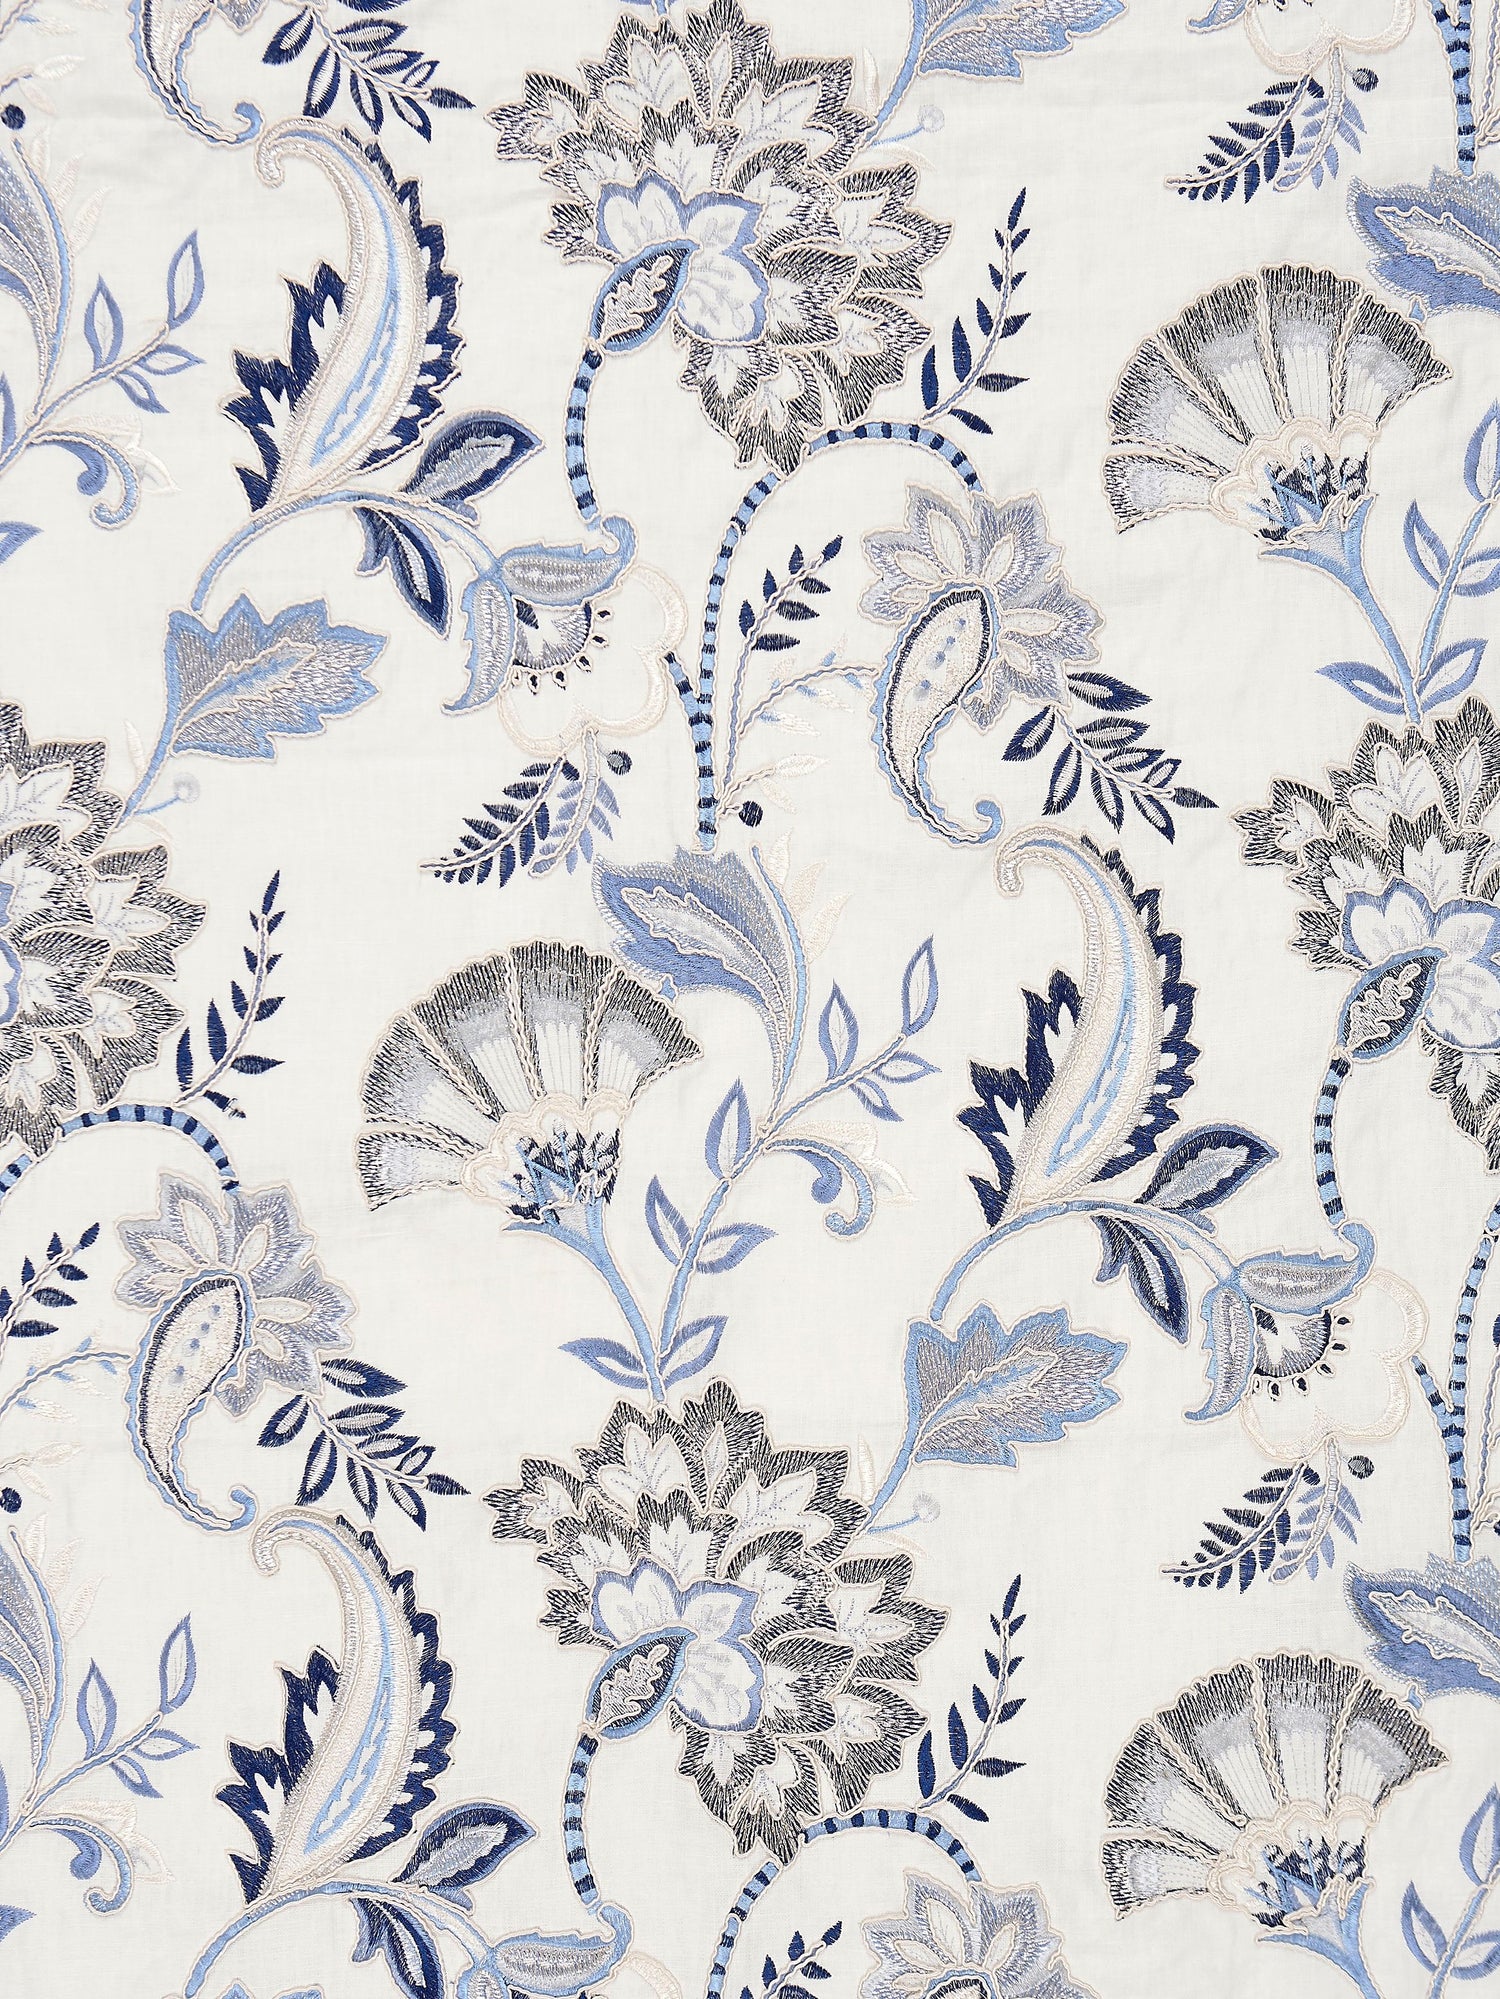 Adara Embroidery fabric in delft color - pattern number SC 000127036 - by Scalamandre in the Scalamandre Fabrics Book 1 collection